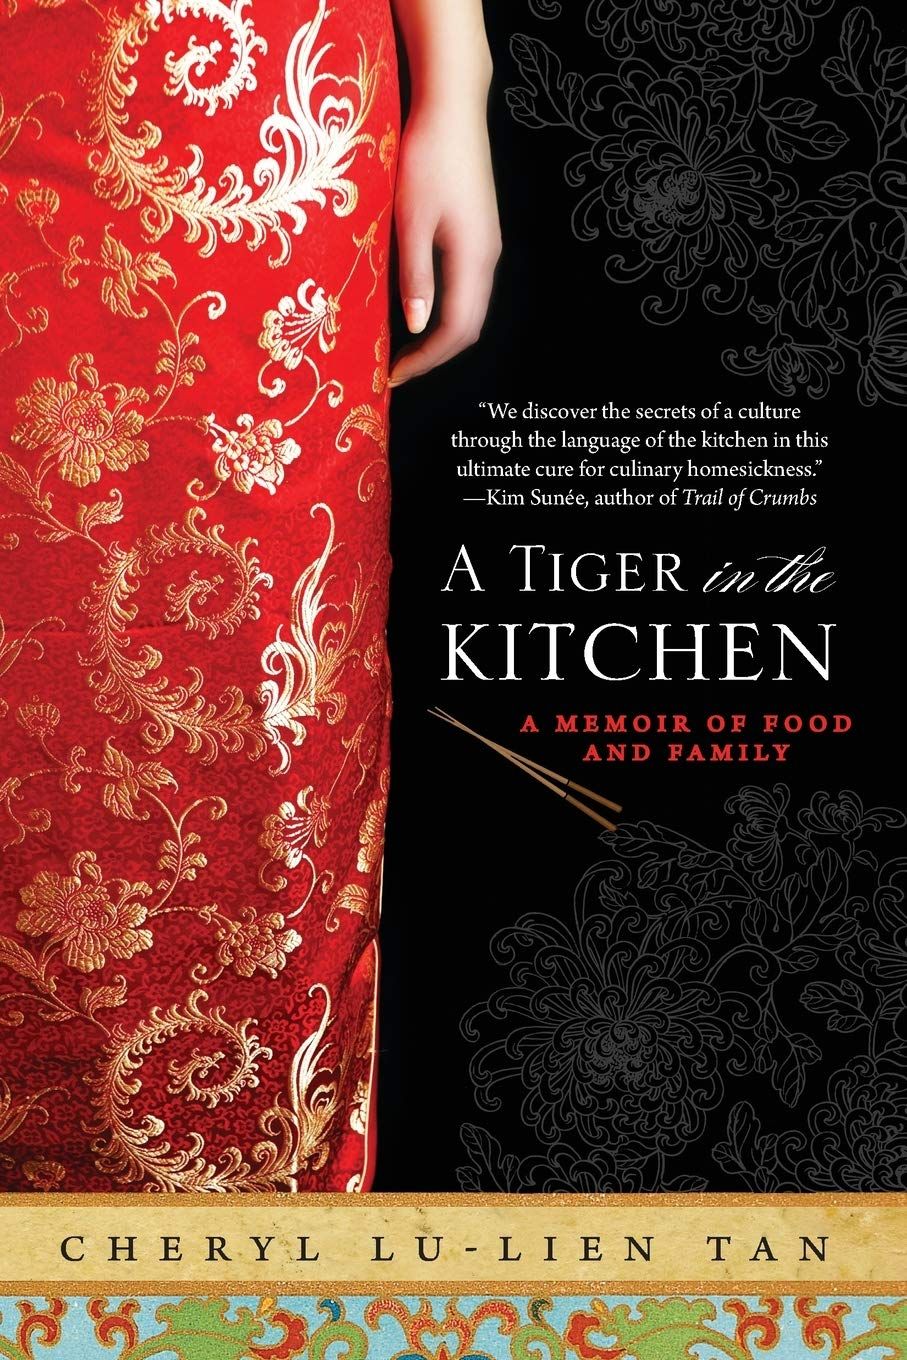 A Tiger in the Kitchen : A Memoir of Food and Family by Cheryl Lu-Lien Tan book cover